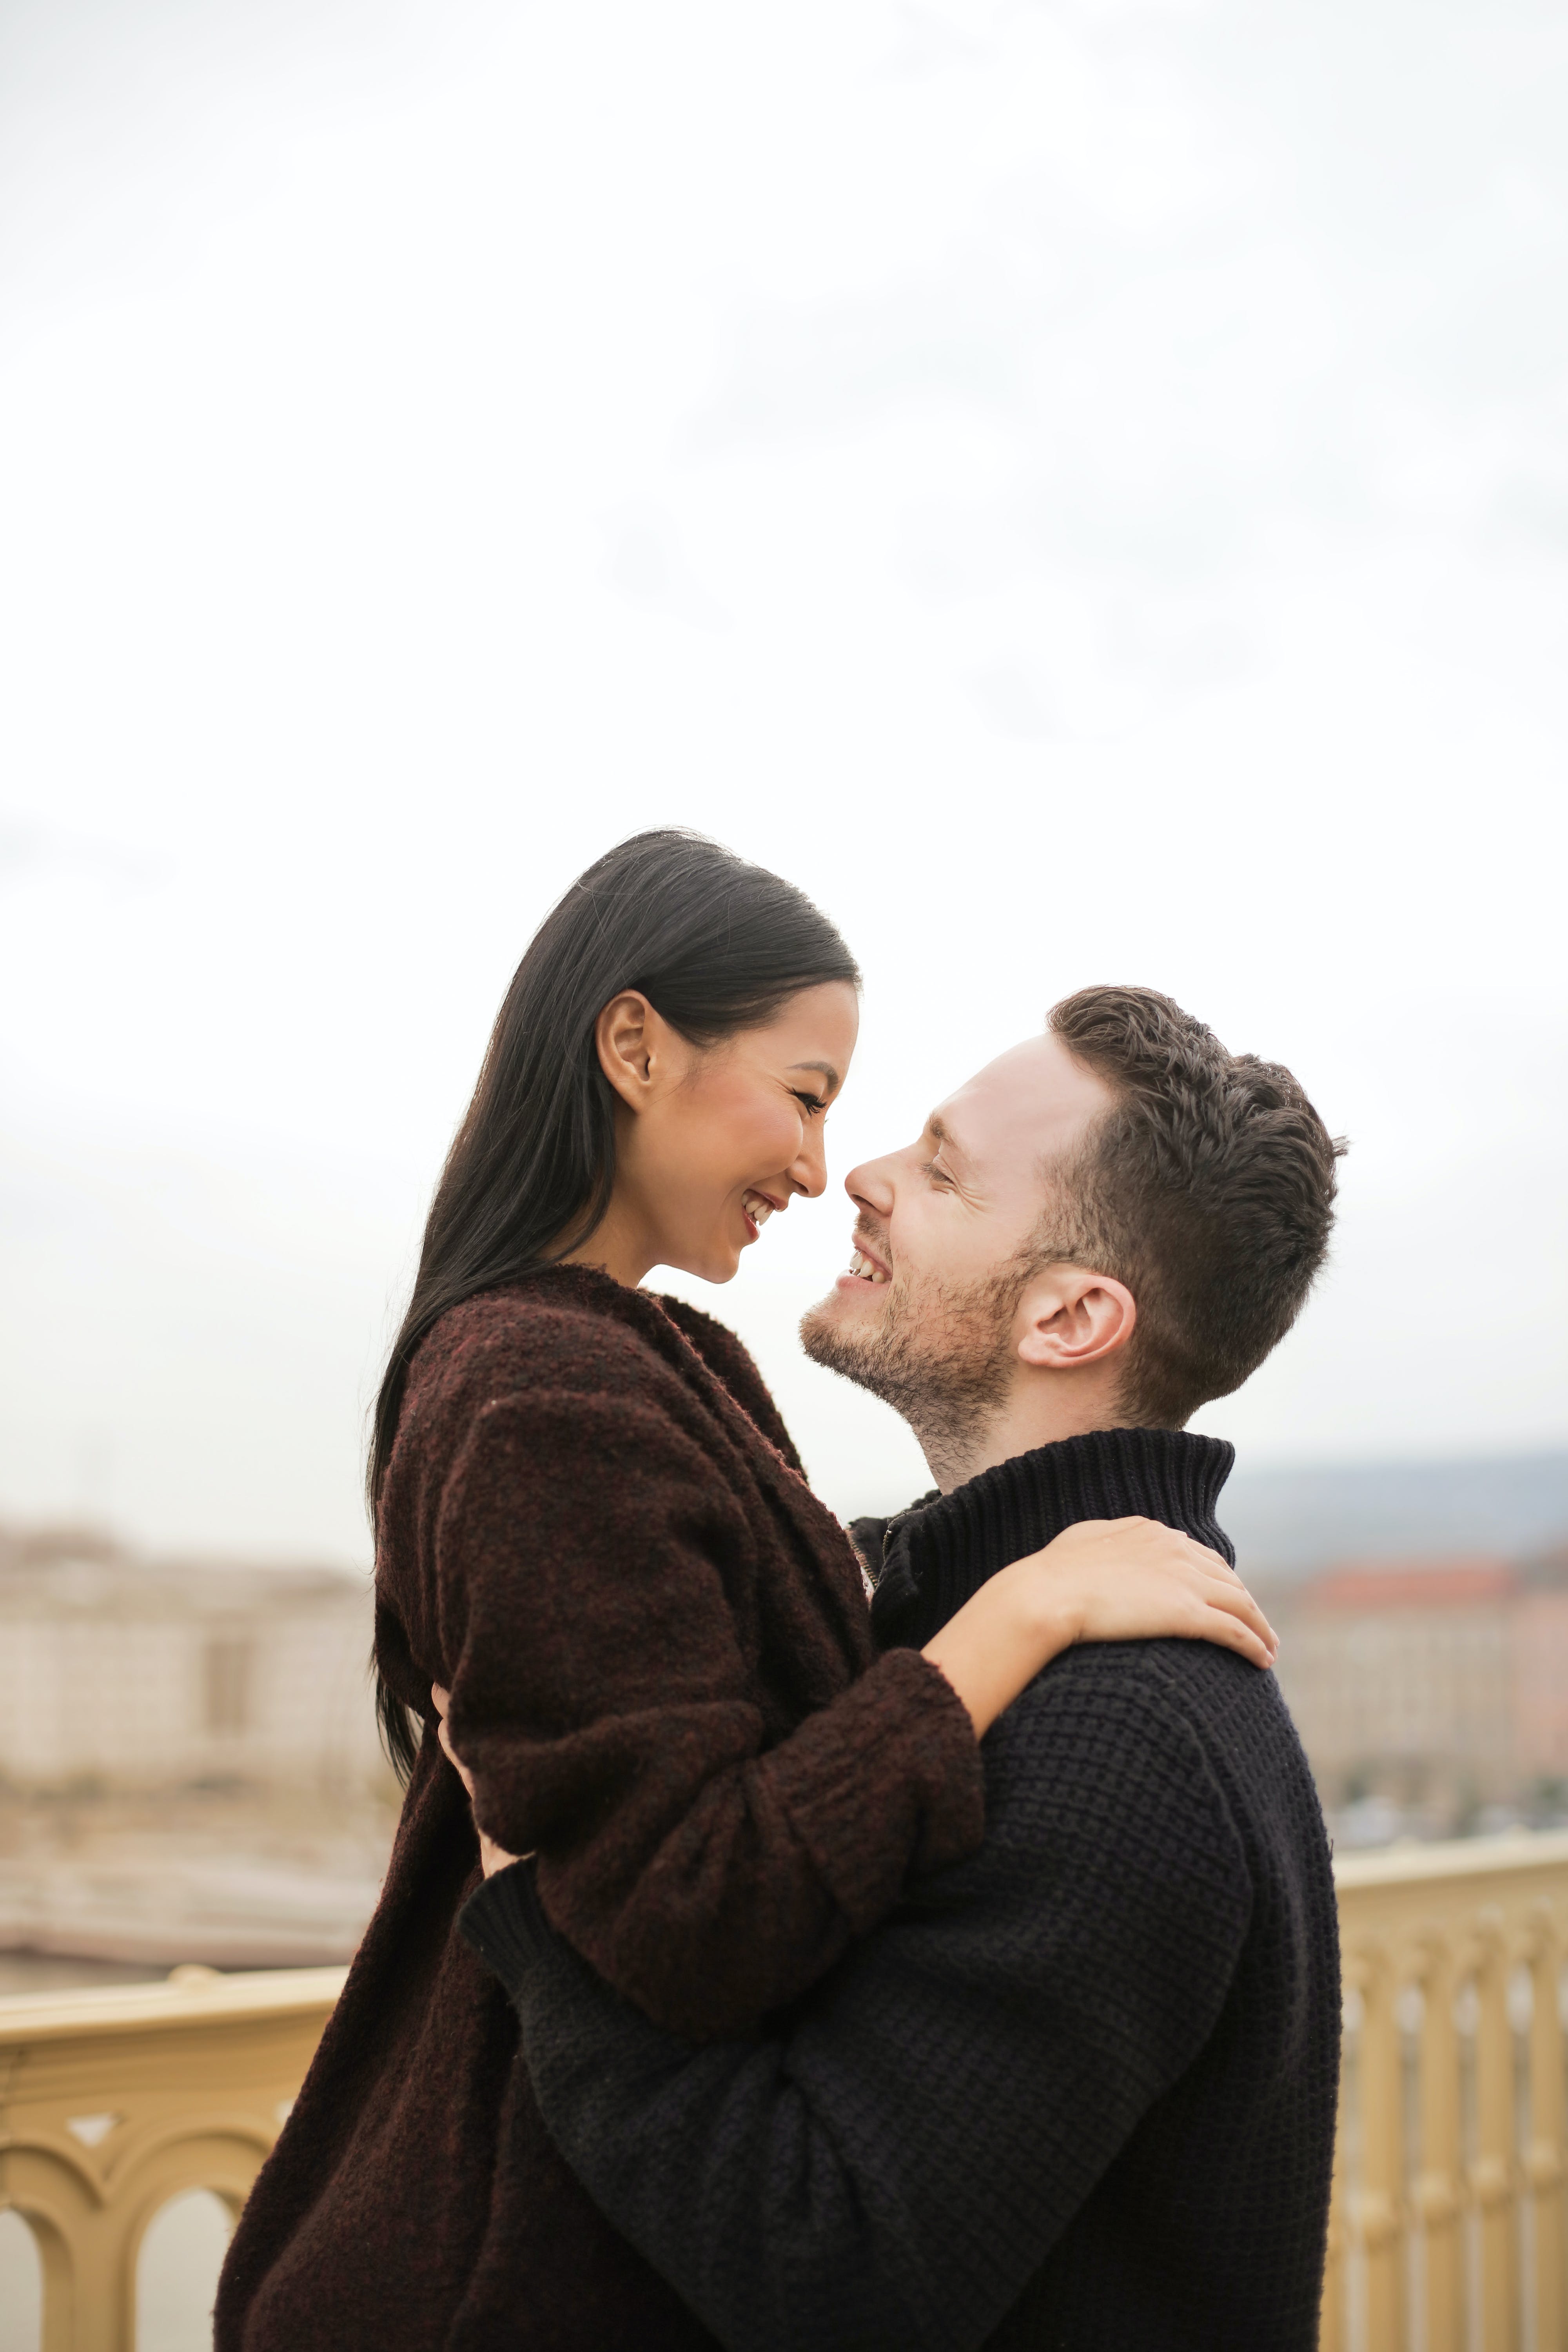 A boyfriend smiling while happily lifting his girlfriend | Source: Pexels